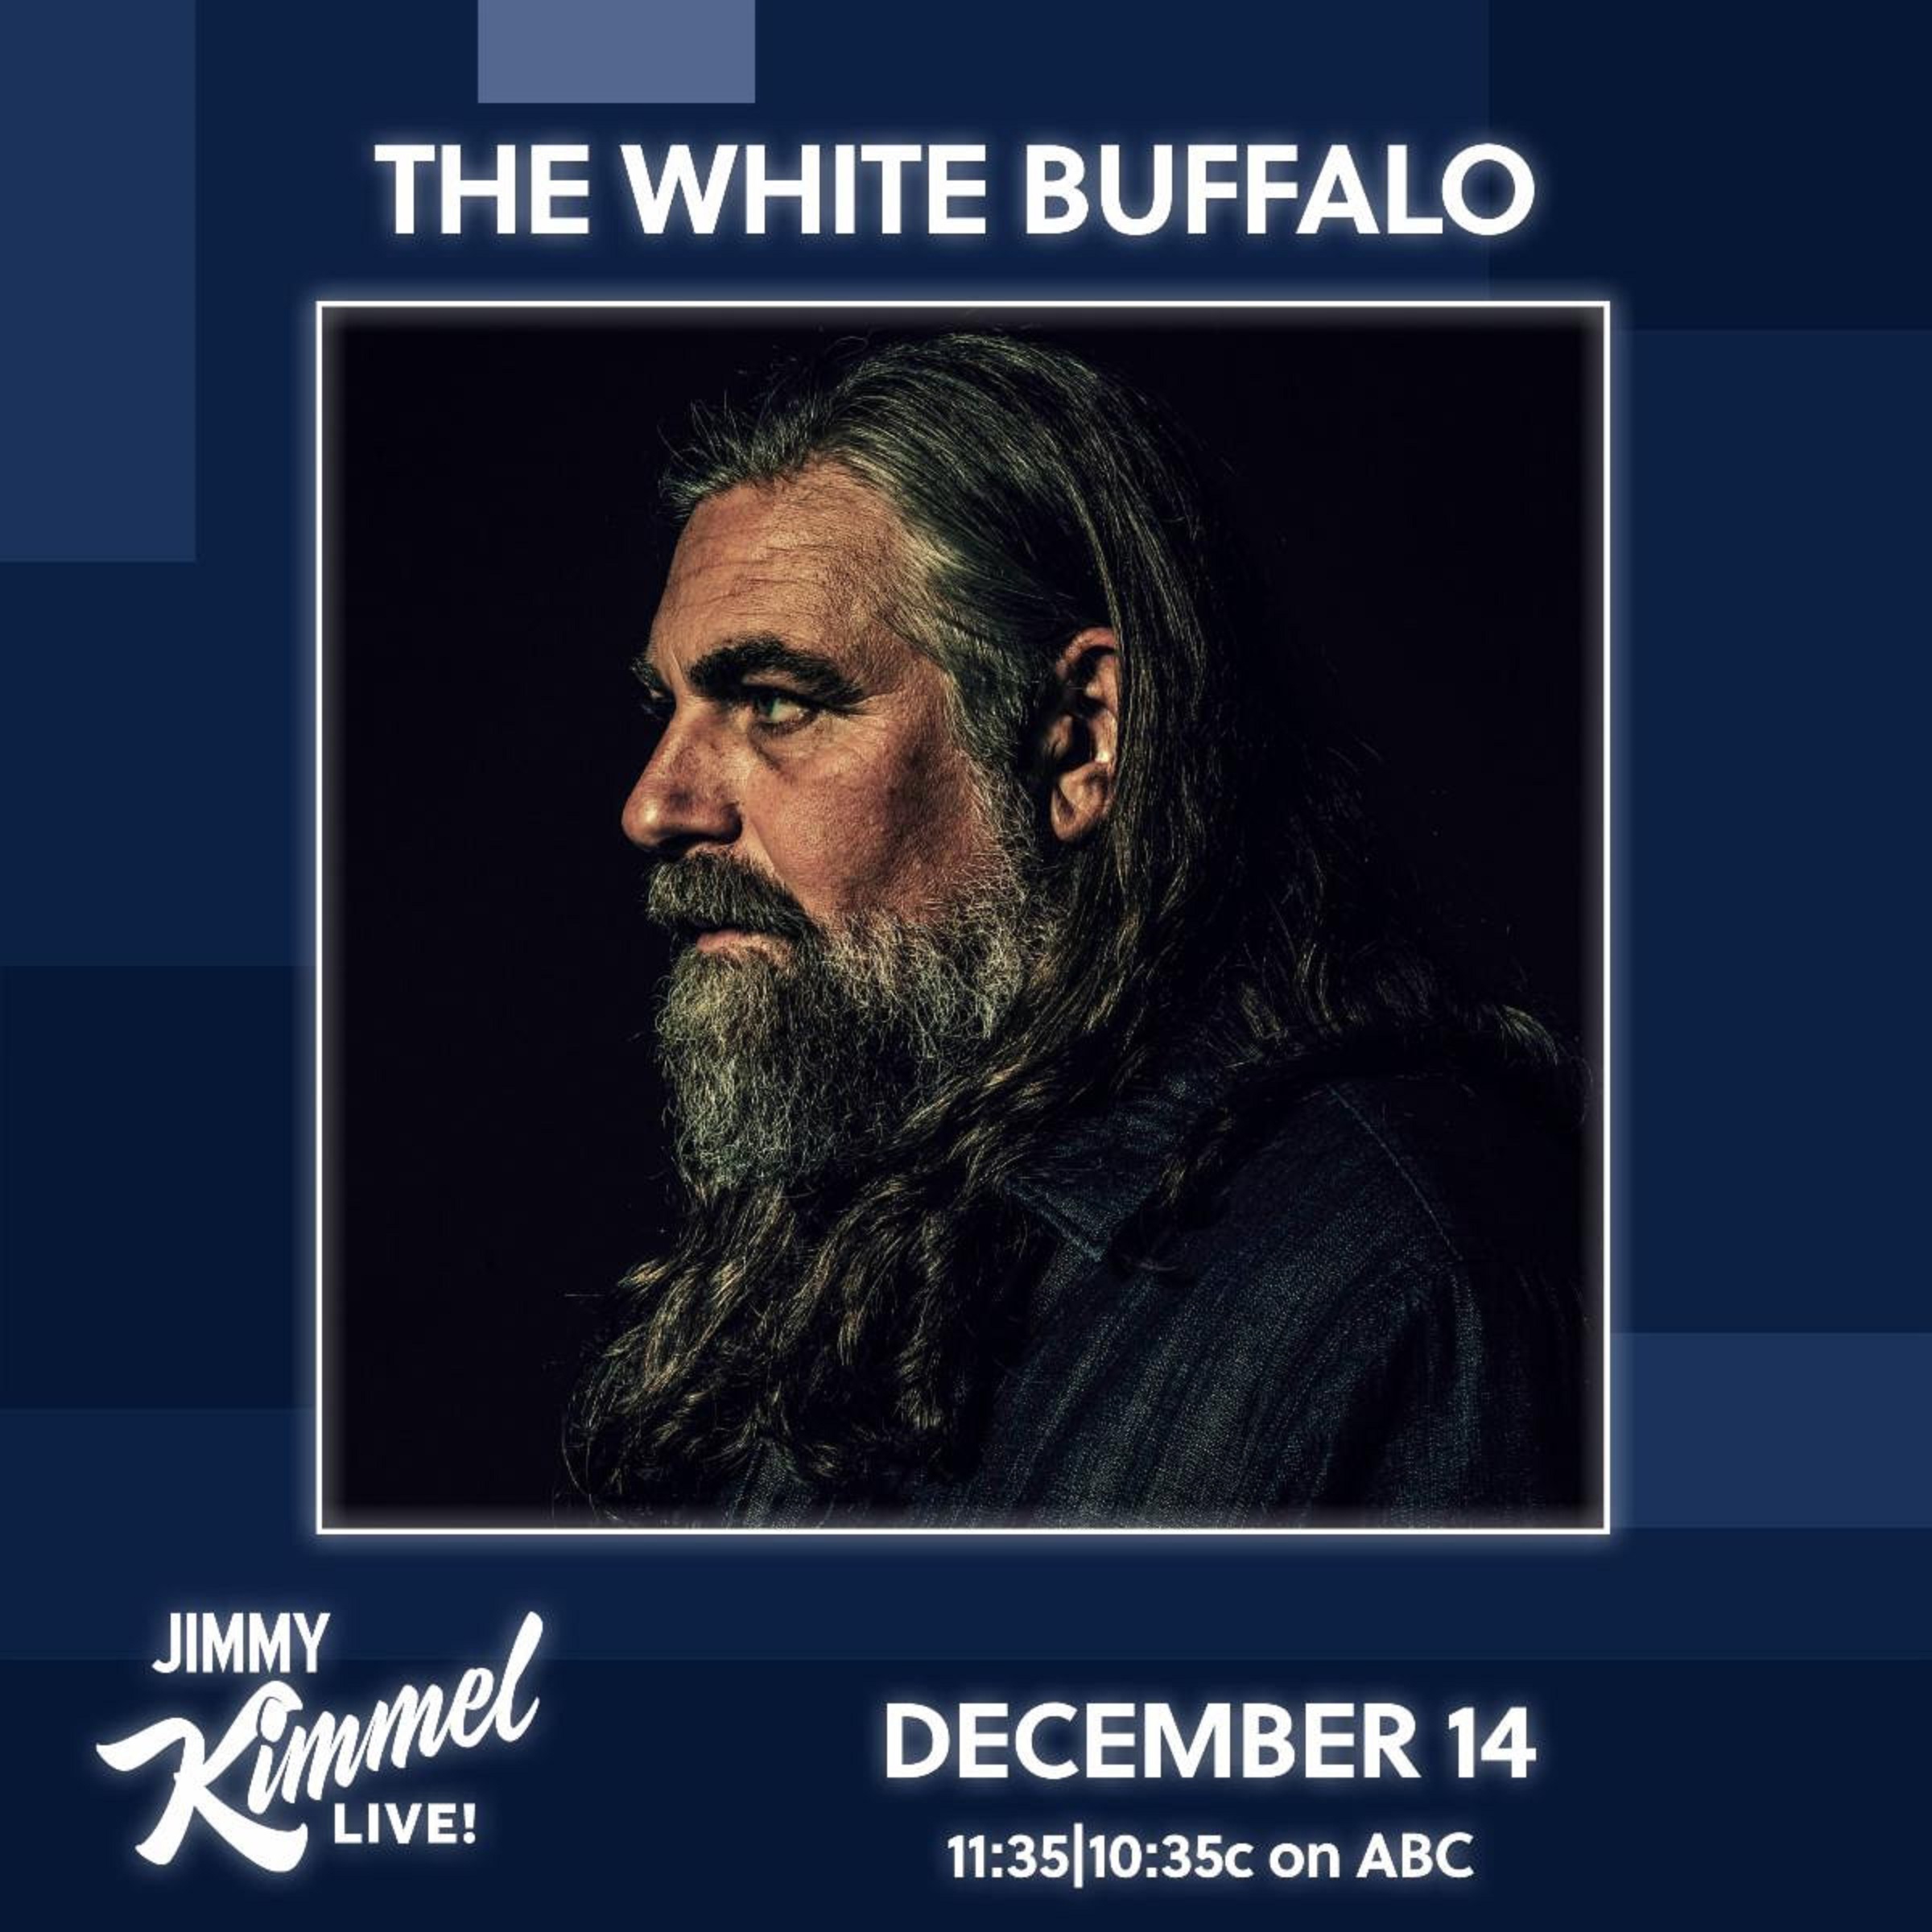 Watch The White Buffalo on Jimmy Kimmel Live! Wed. Dec. 14, 11:35P ET/PT on ABC